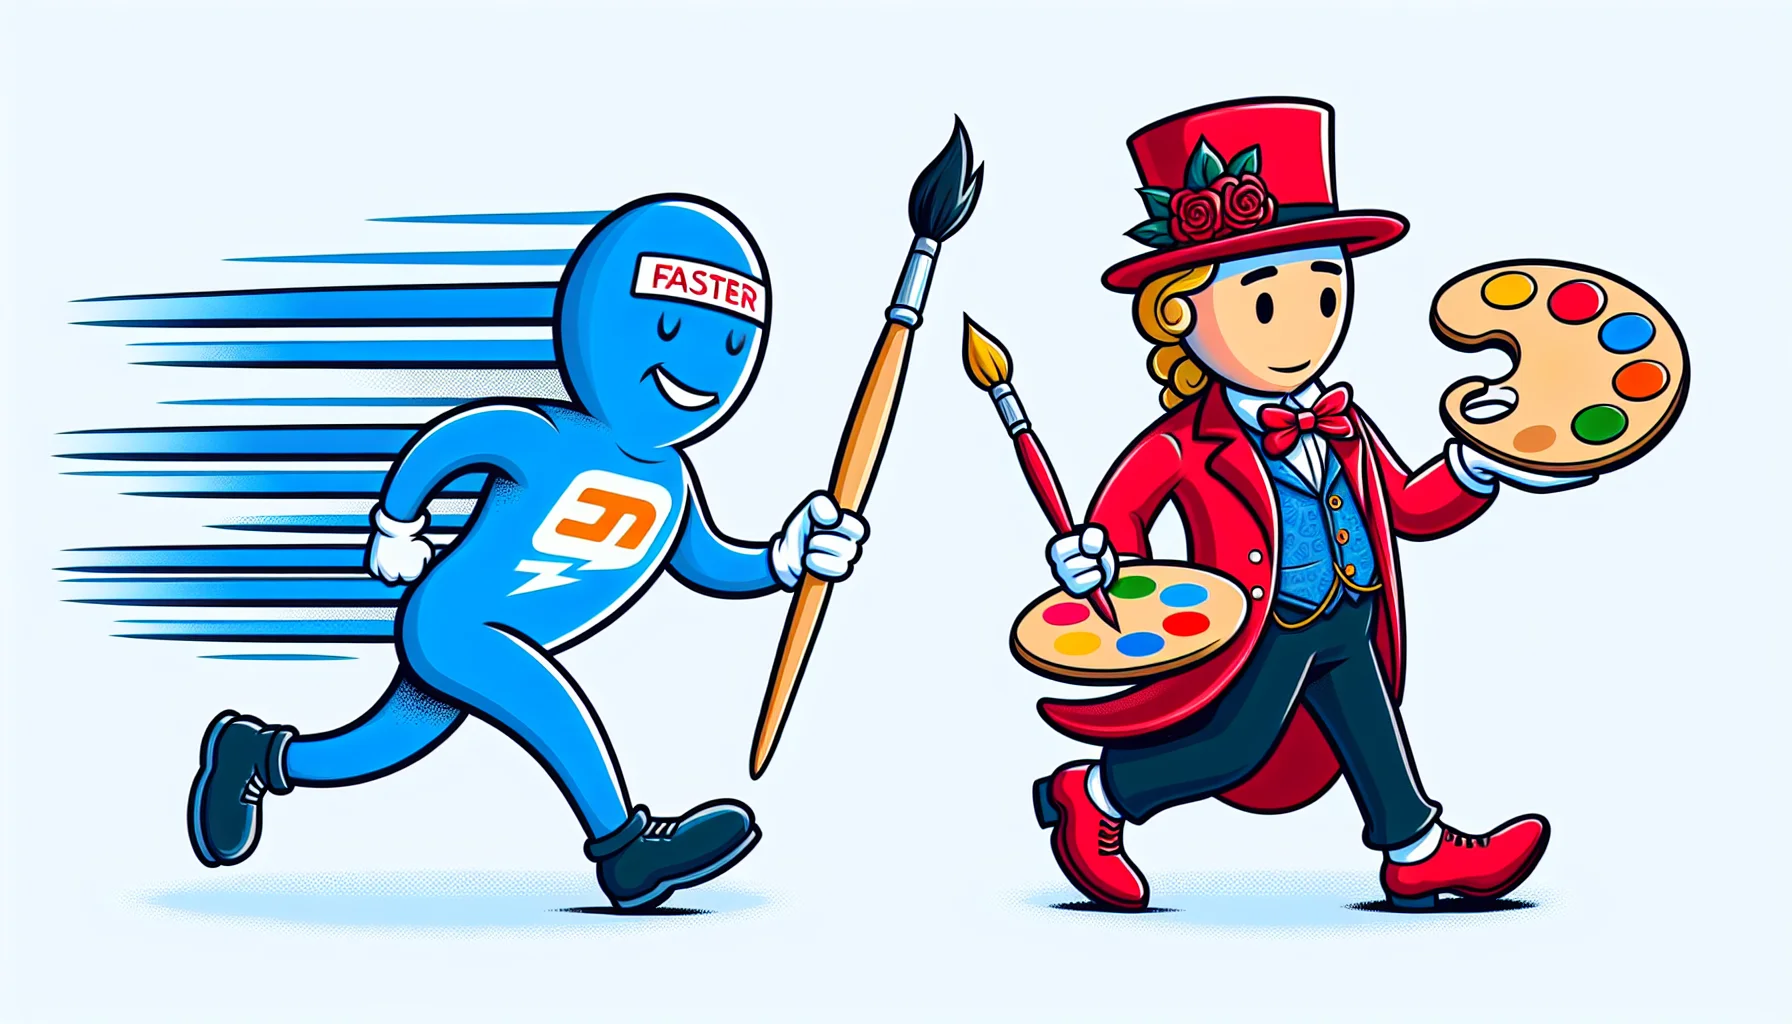 Create a whimsical and humorous image that represents the concept of web hosting. Picture two non-descript, playful characters symbolizing different web hosting platforms. One character could be dressed in an outfit colored blue: faster, a running symbol, signifying speed and performance. The other character is donning a fashionable rosette red attire, holds a painter's brush and palette, suggesting creativity and flexibility. This amusing scene might inspire a spirit of friendly competition and charm among the two characters, underlining the allure of web hosting.